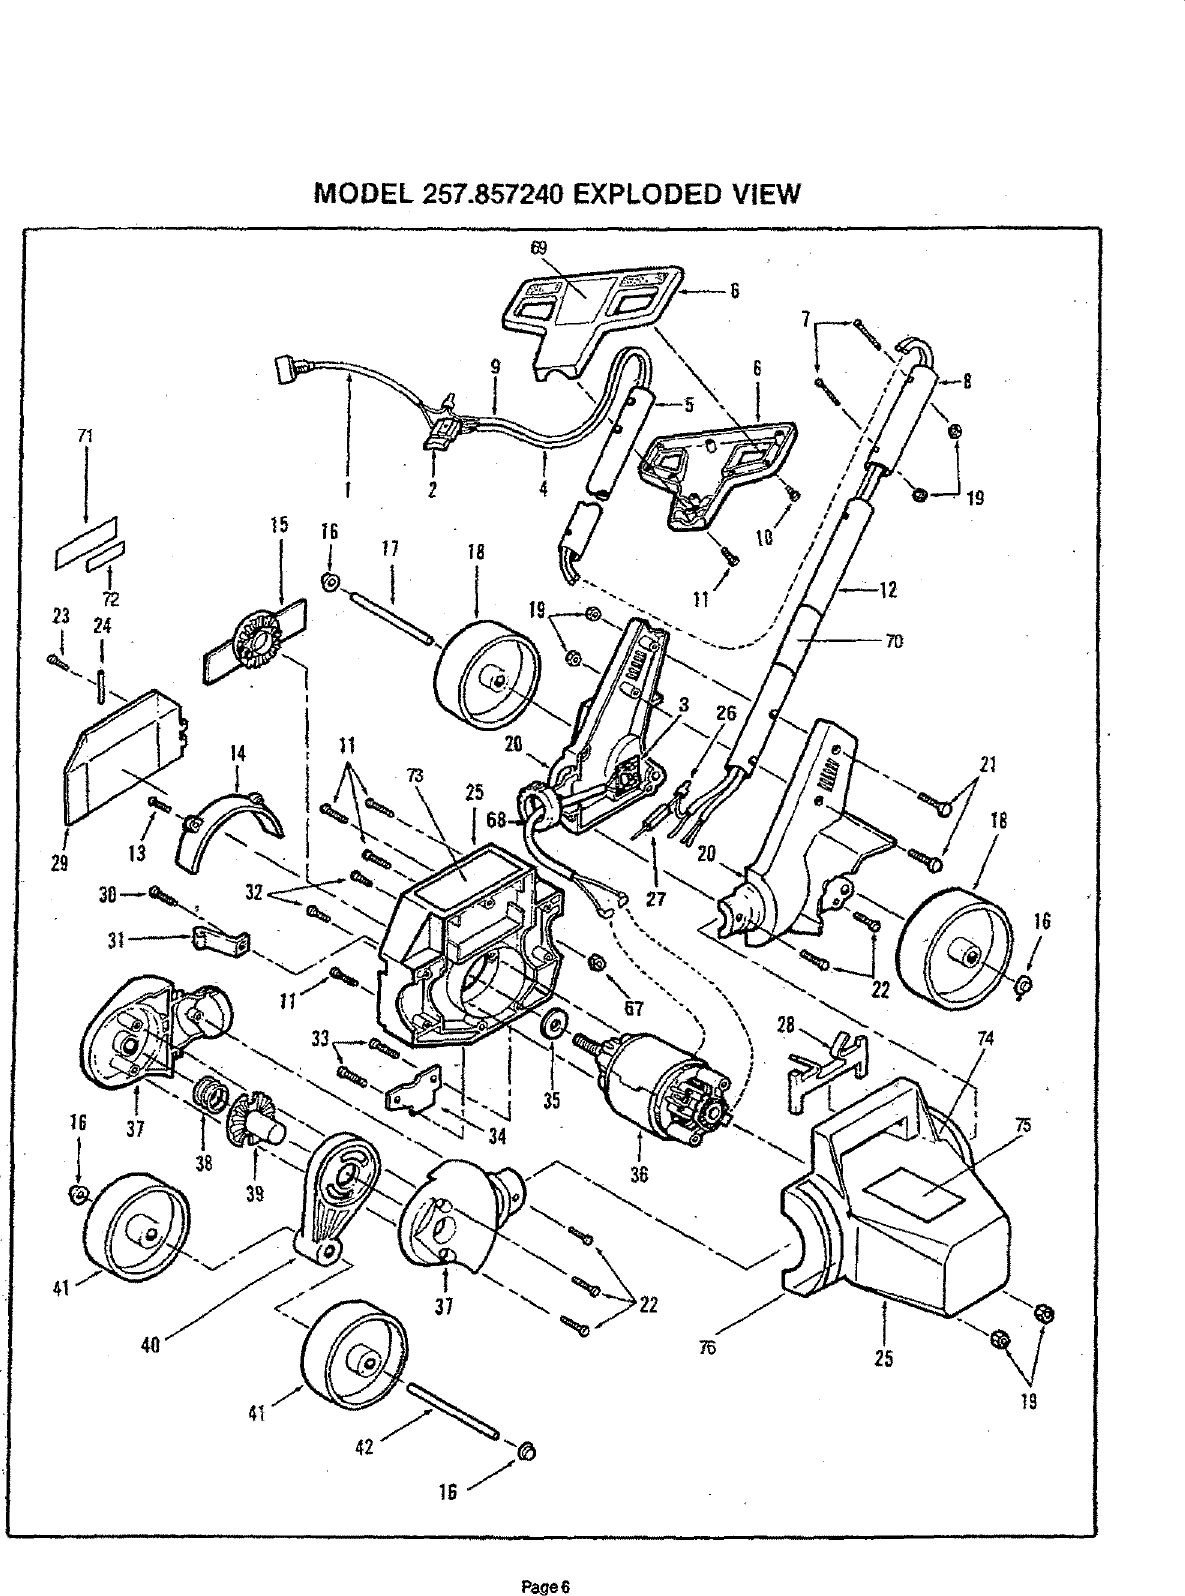 Page 6 of 8 - Craftsman 257857240 User Manual  ELECTRIC EDGER - Manuals And Guides L0707008